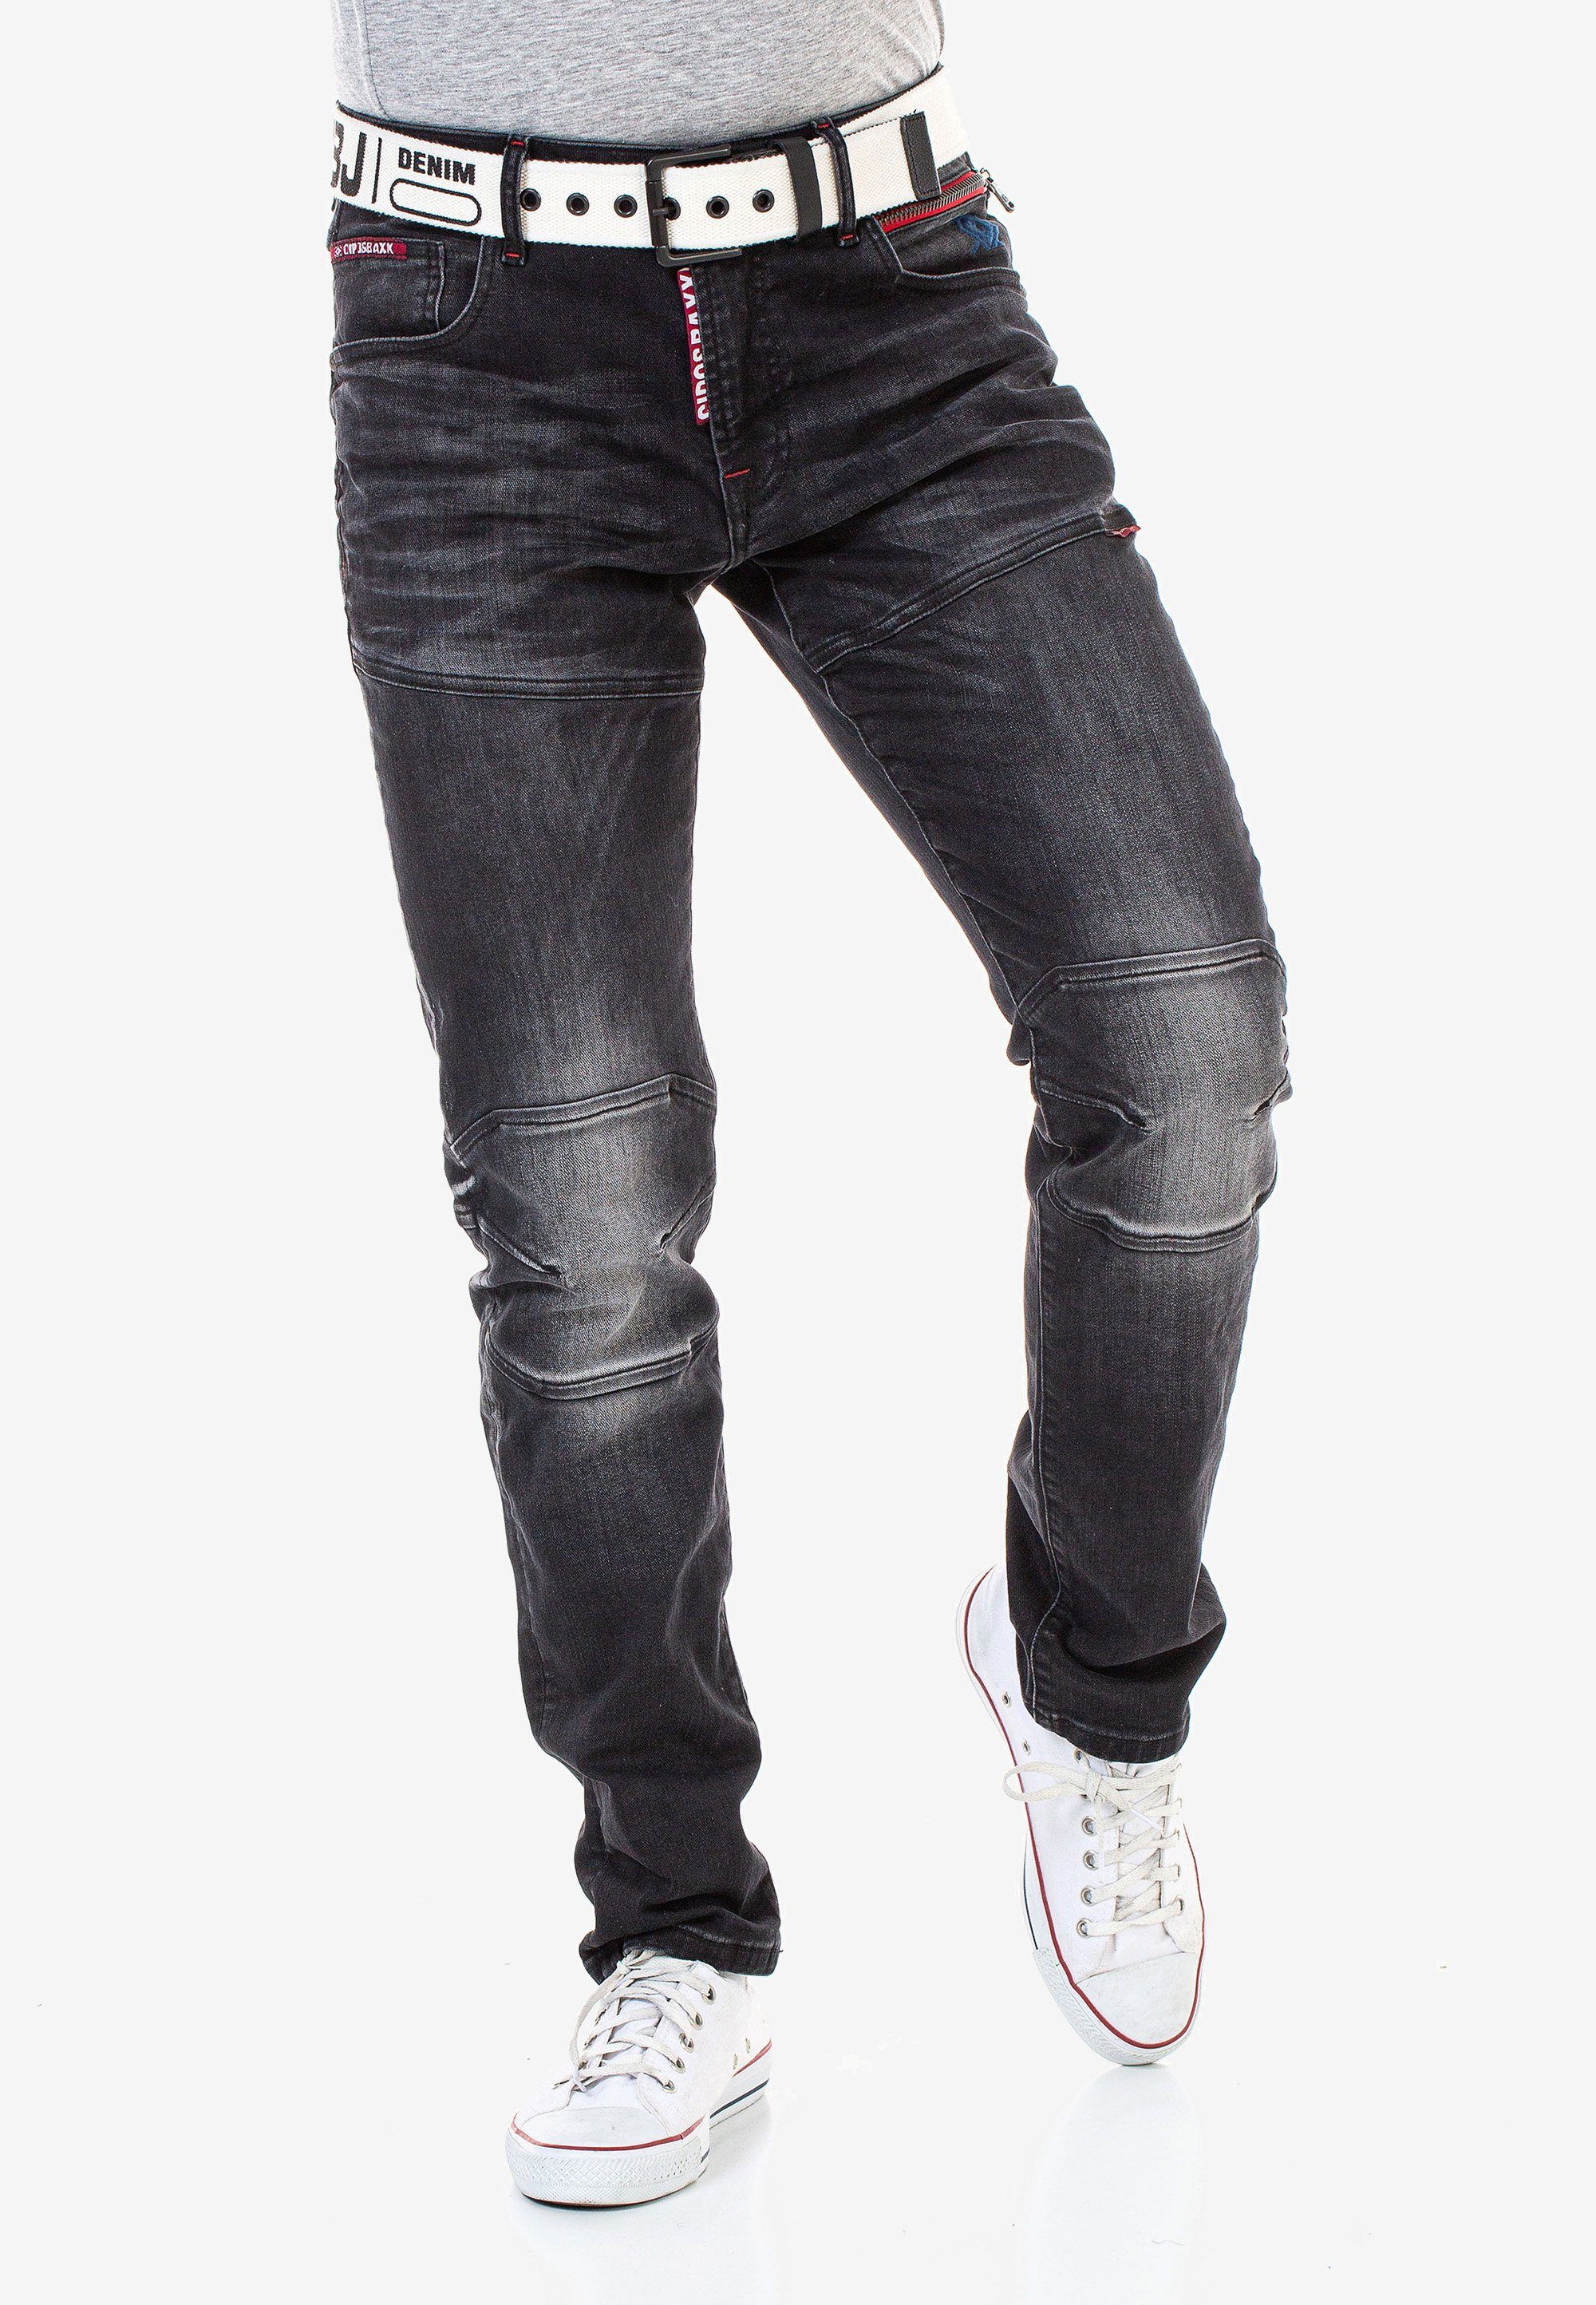 Cipo & Baxx Used-Waschung mit cooler Straight-Jeans